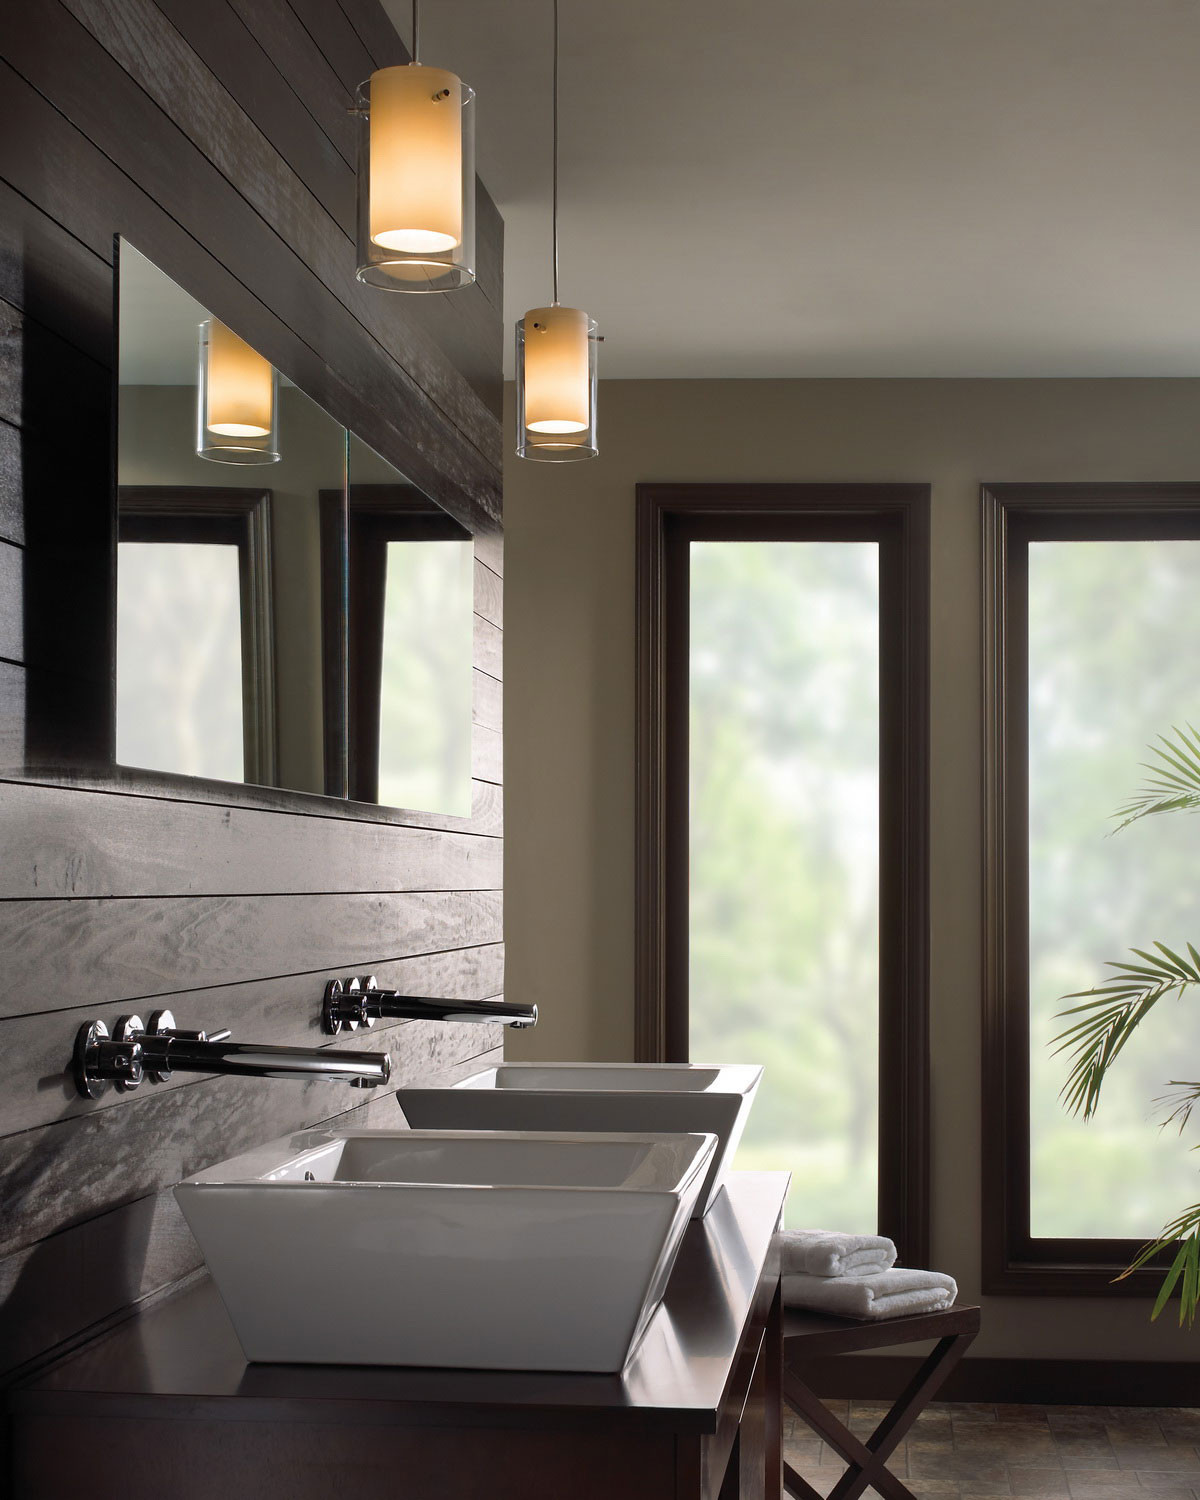 Light Bulbs For Bathroom
 Bathroom Pendant Lighting and How to Incorporate It into